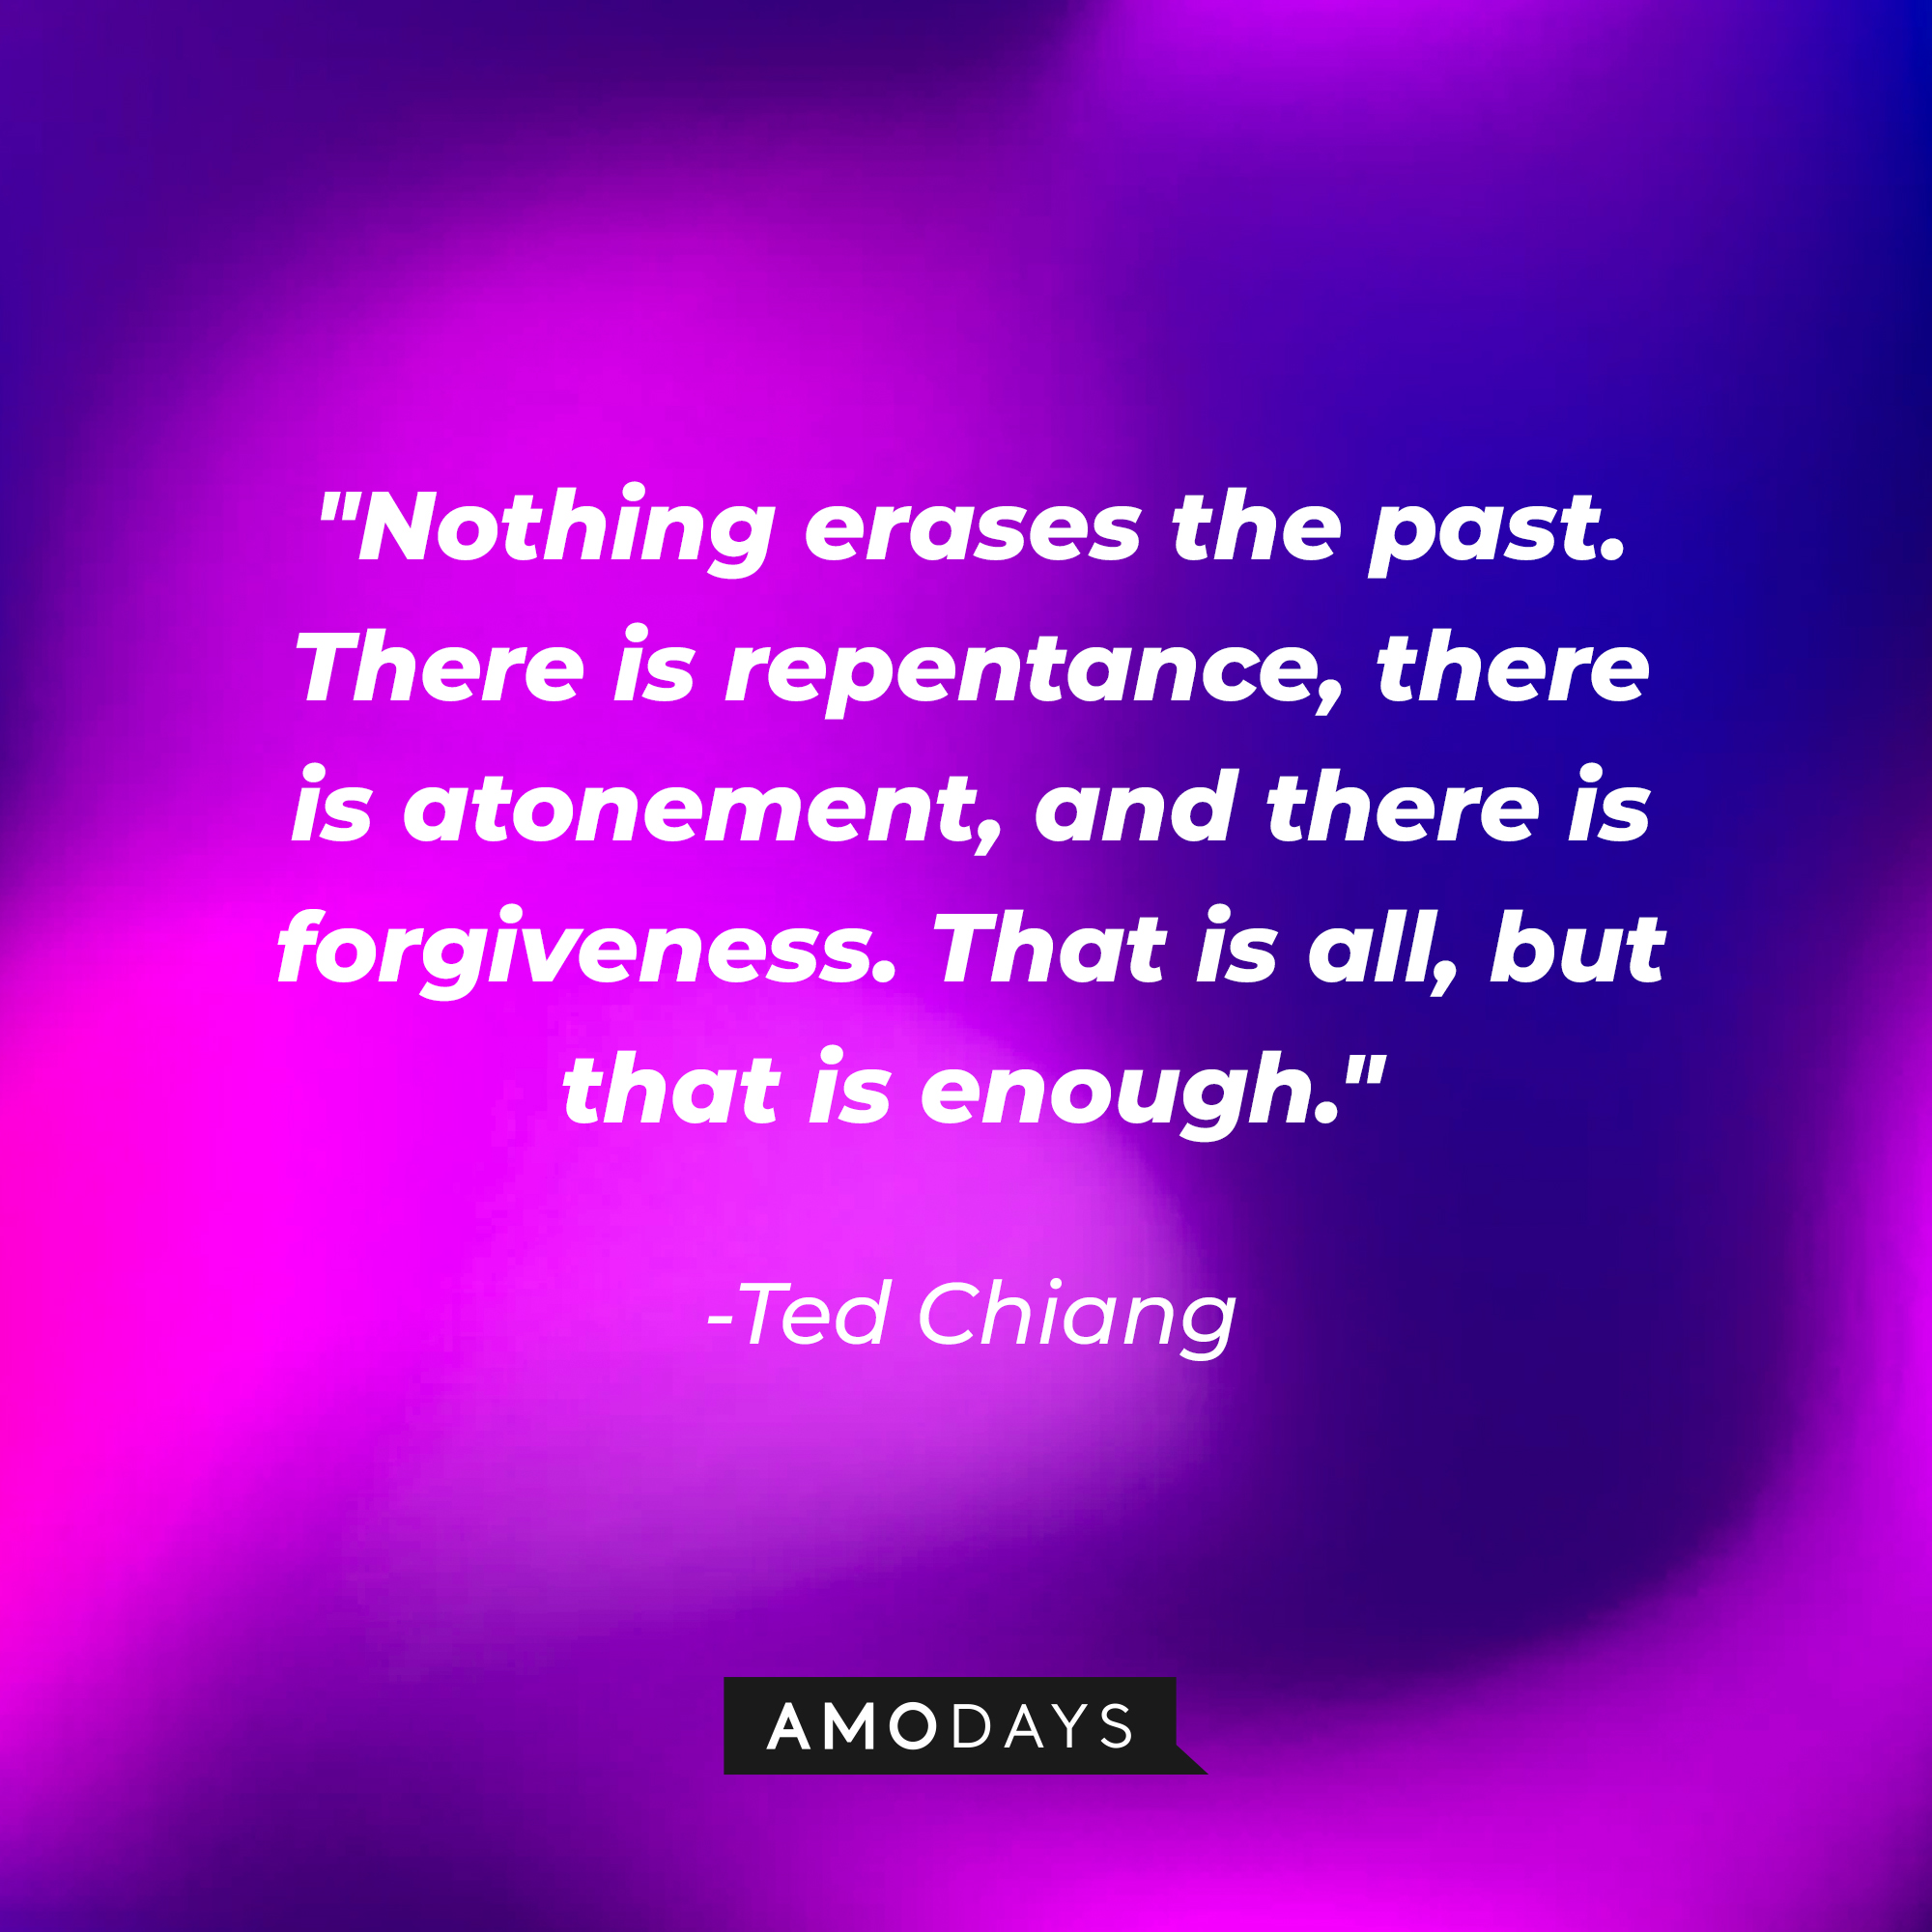 A photo with Ted Chiang's photo, "Nothing erases the past. There is repentance, there is atonement, and there is forgiveness. That is all, but that is enough." | Source: Amodays